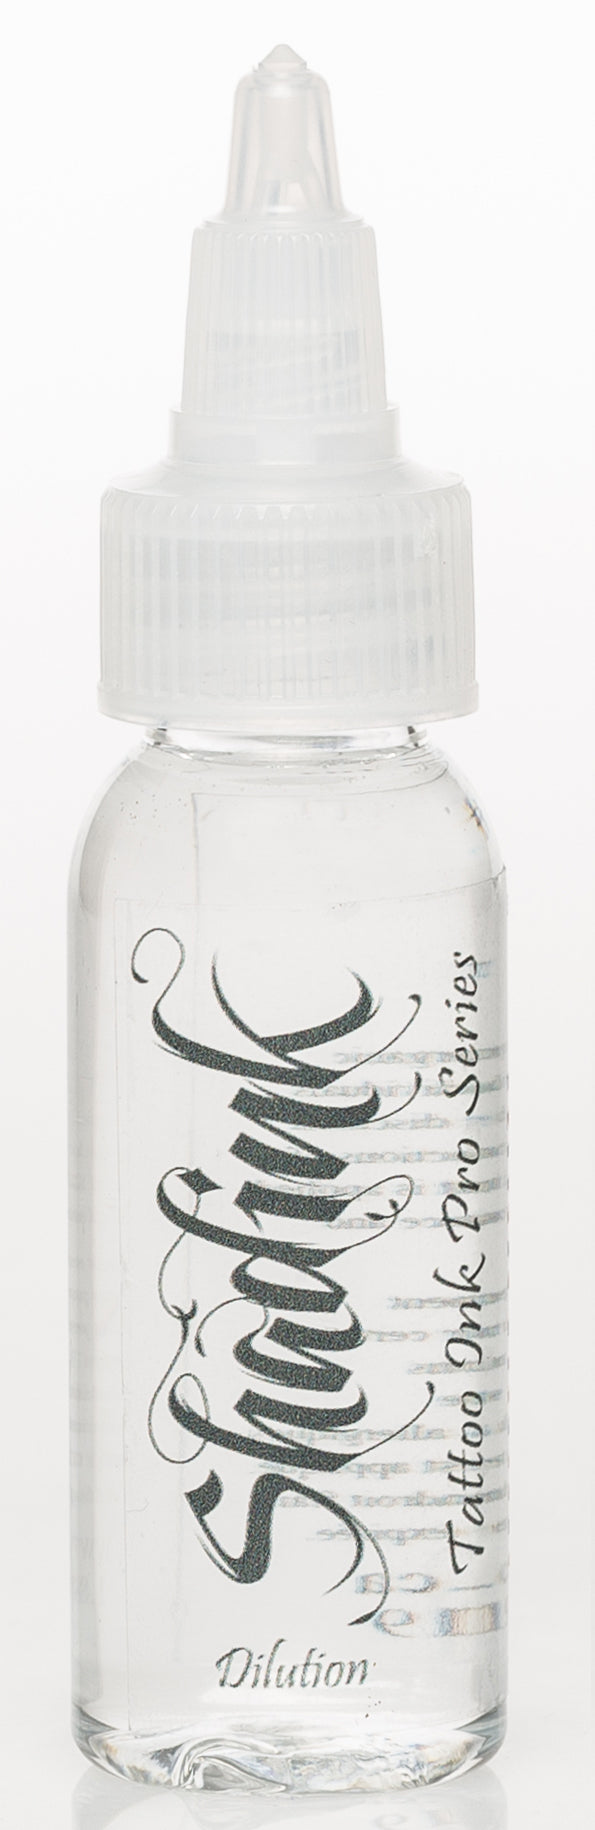 Shadink Encre Tattoo Dilution